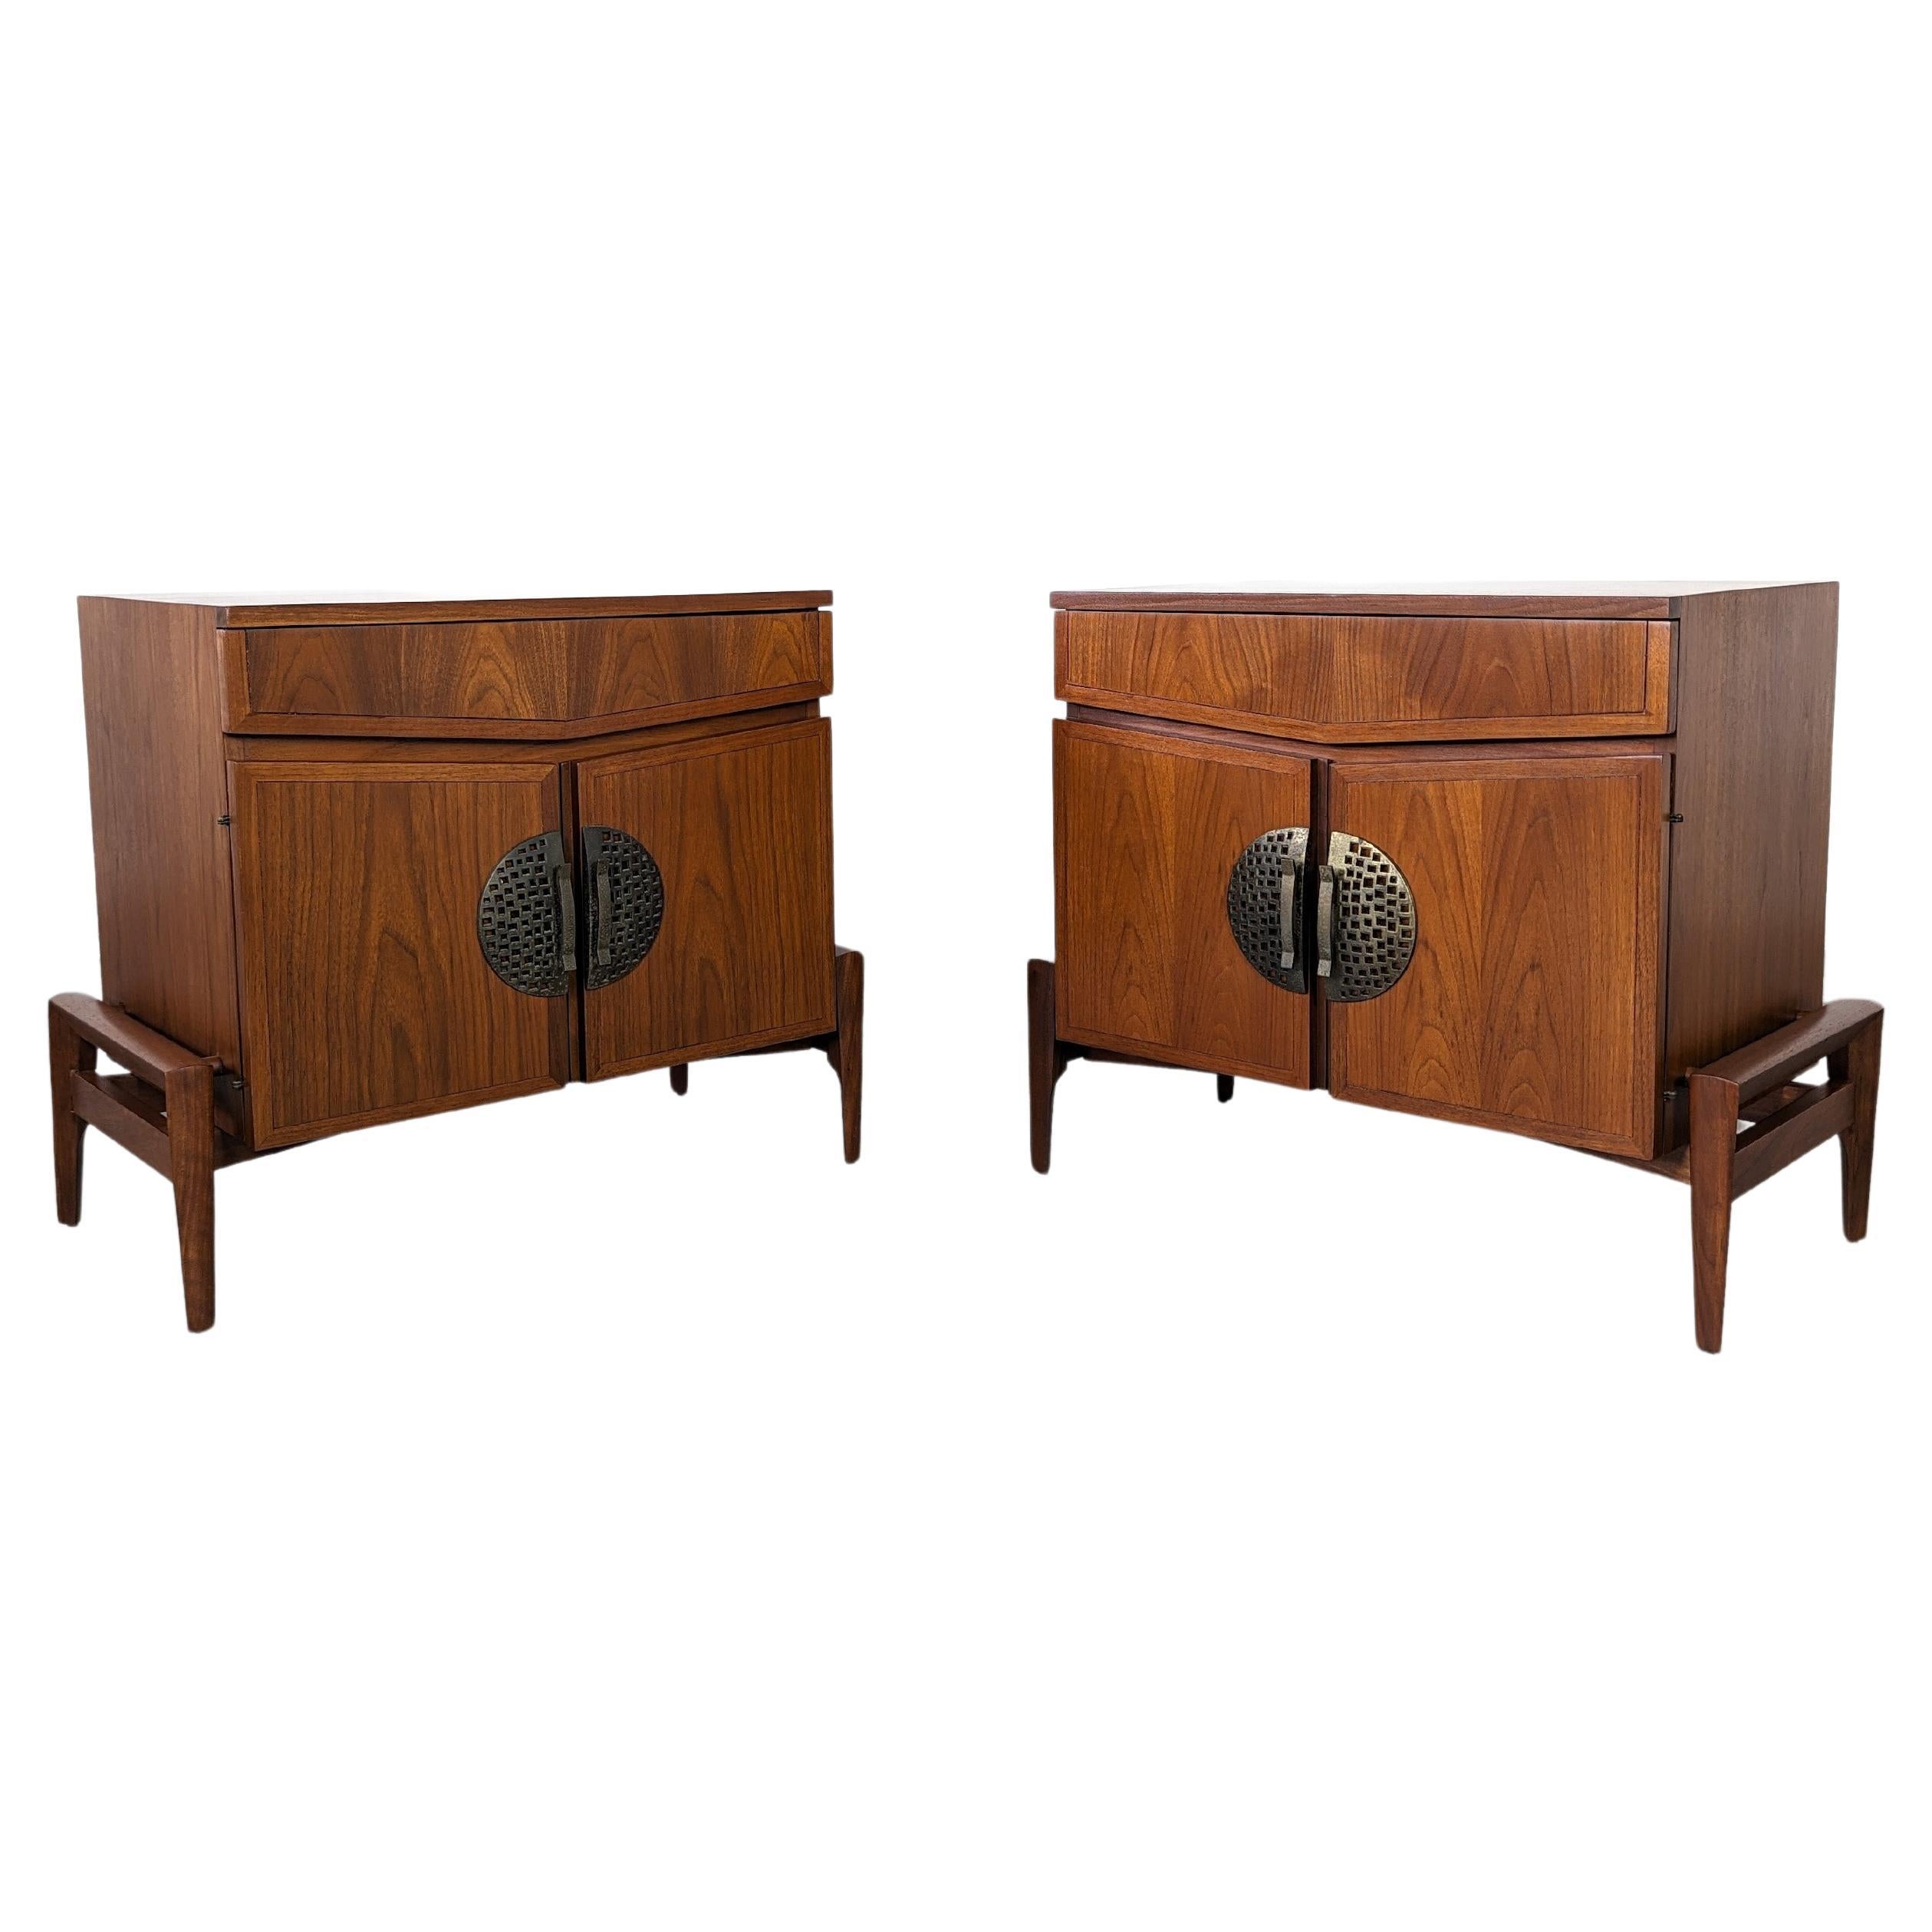 Pair of Mid Century Walnut Nightstands by Helen Hobey For Baker, 1960s For Sale